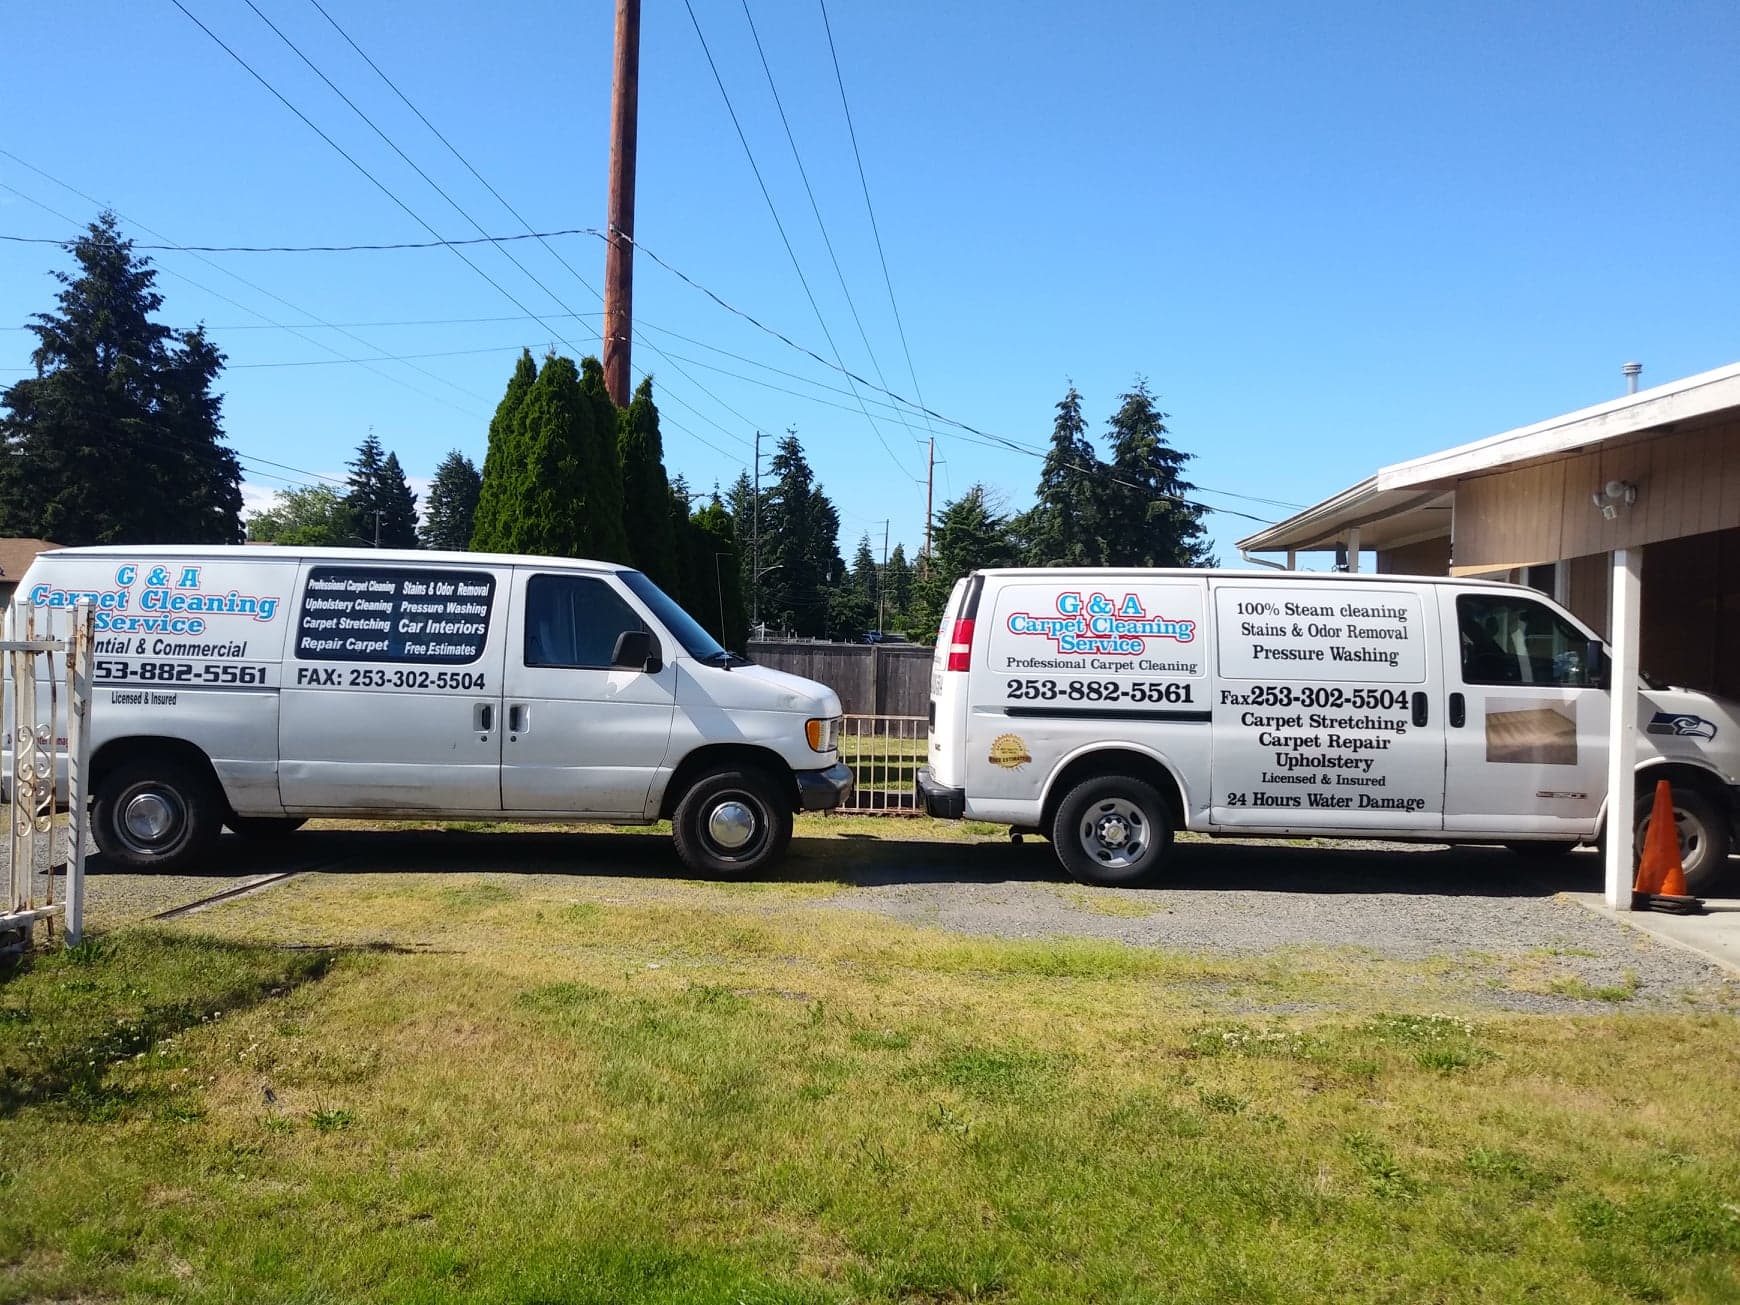 G&A Carpet Cleaning